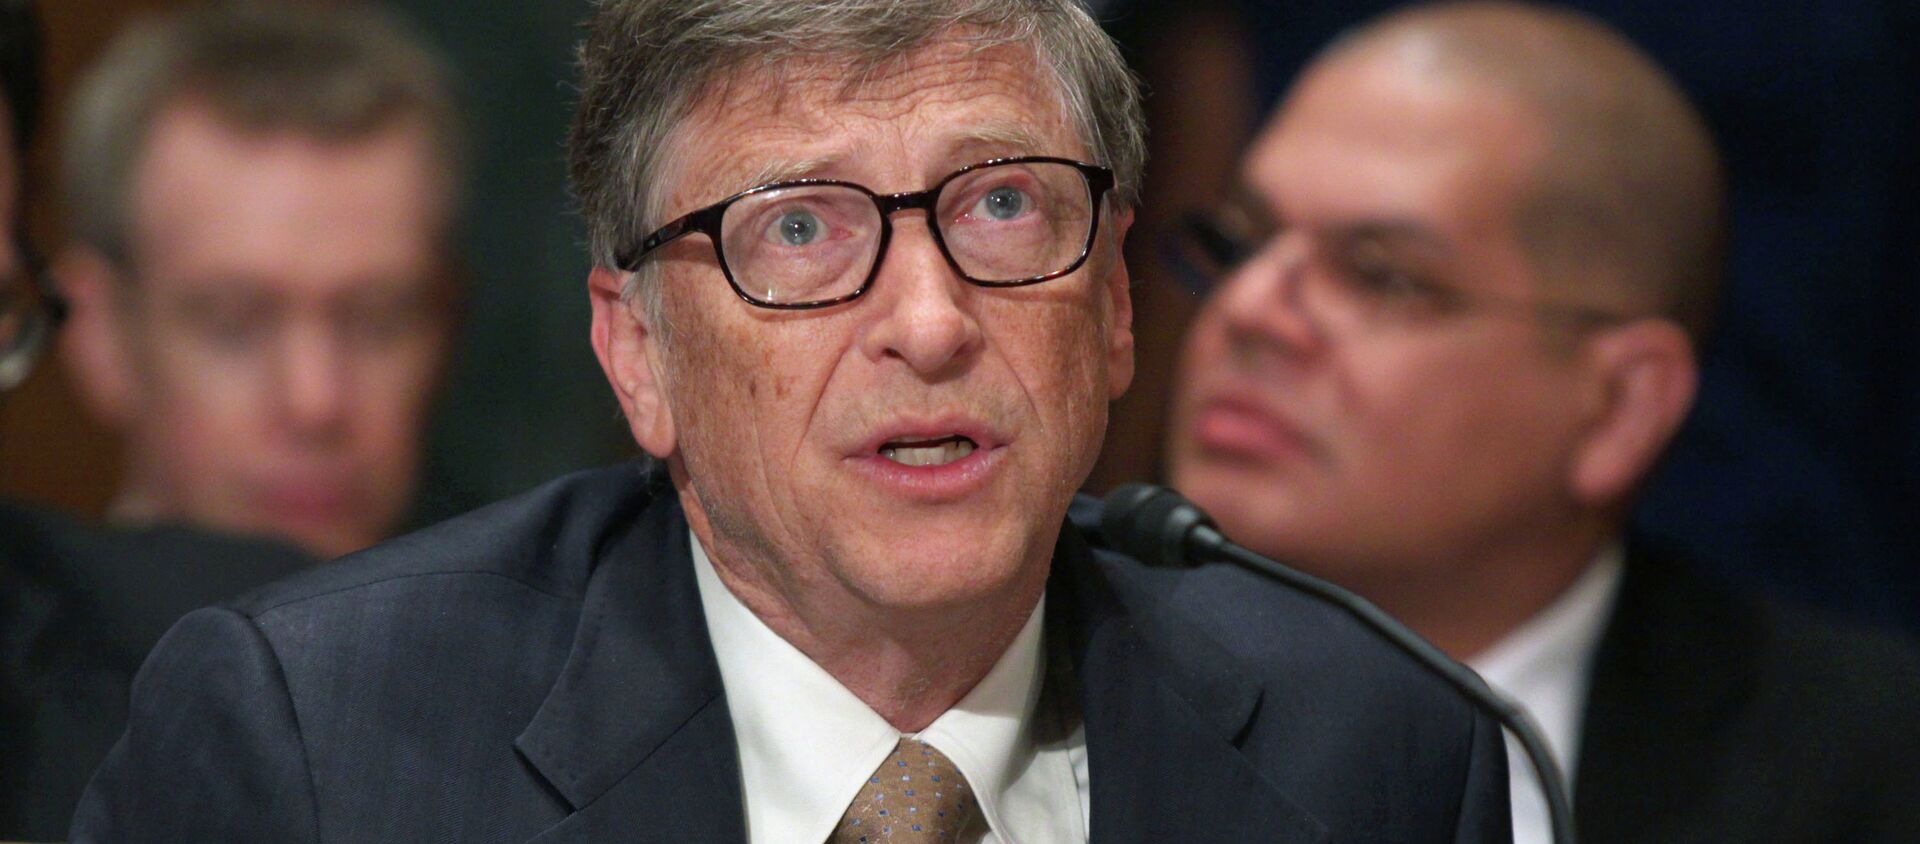 Bill Gates, Microsoft co-founder and co-chair of the Bill and Melinda Gates Foundation - Sputnik International, 1920, 03.02.2021